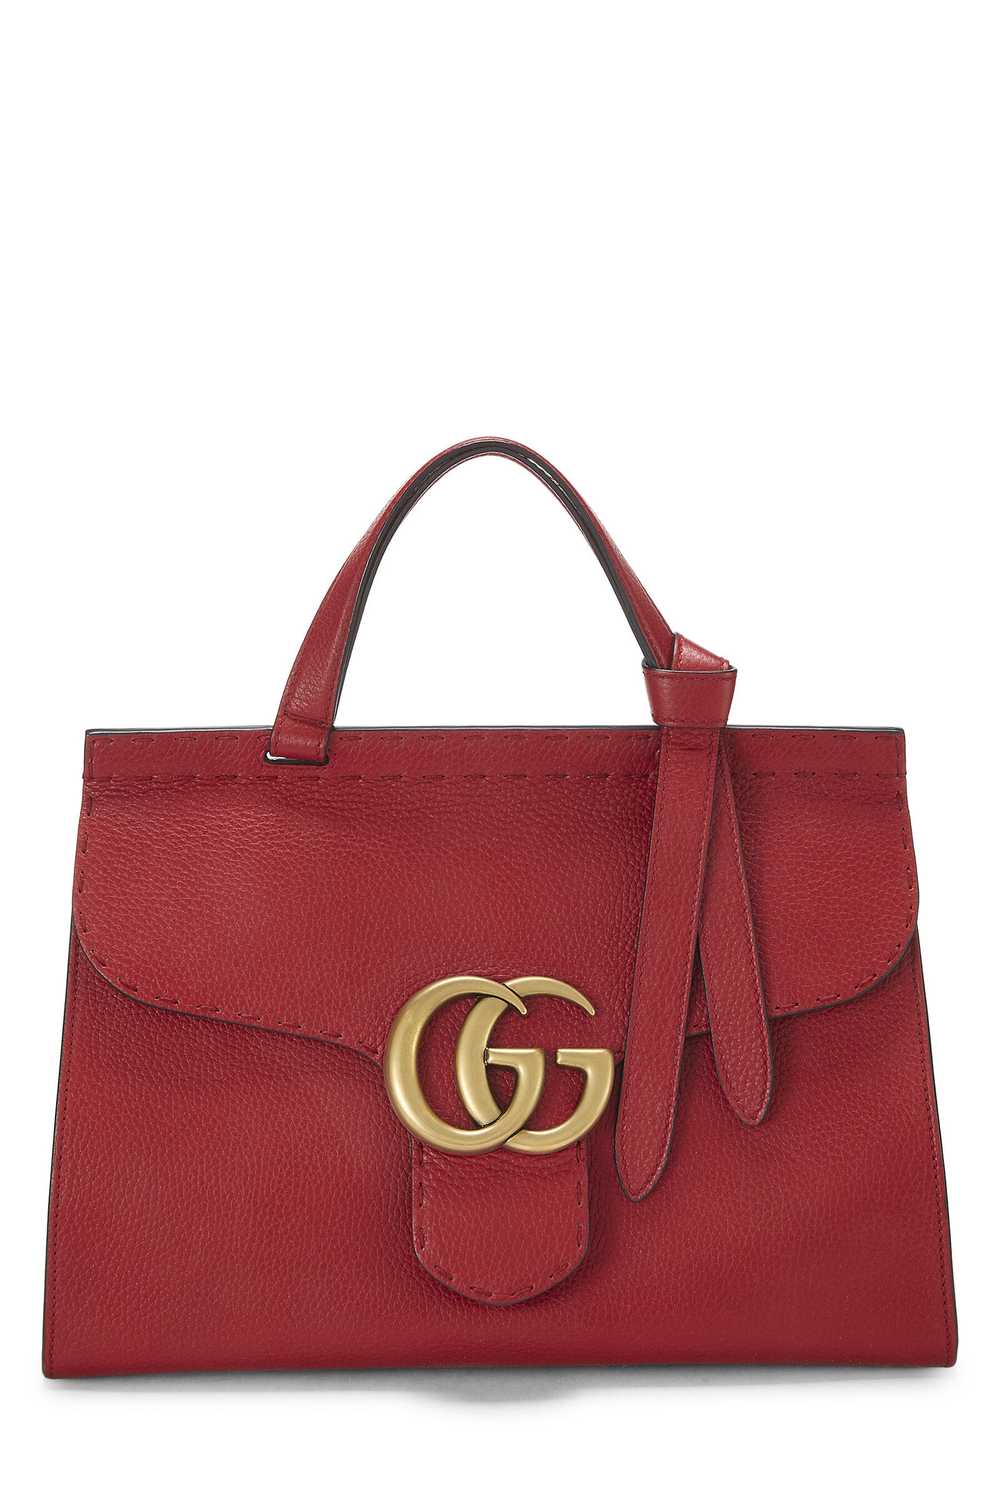 Red Leather GG Marmont Top Handle Flap Bag Small - image 1